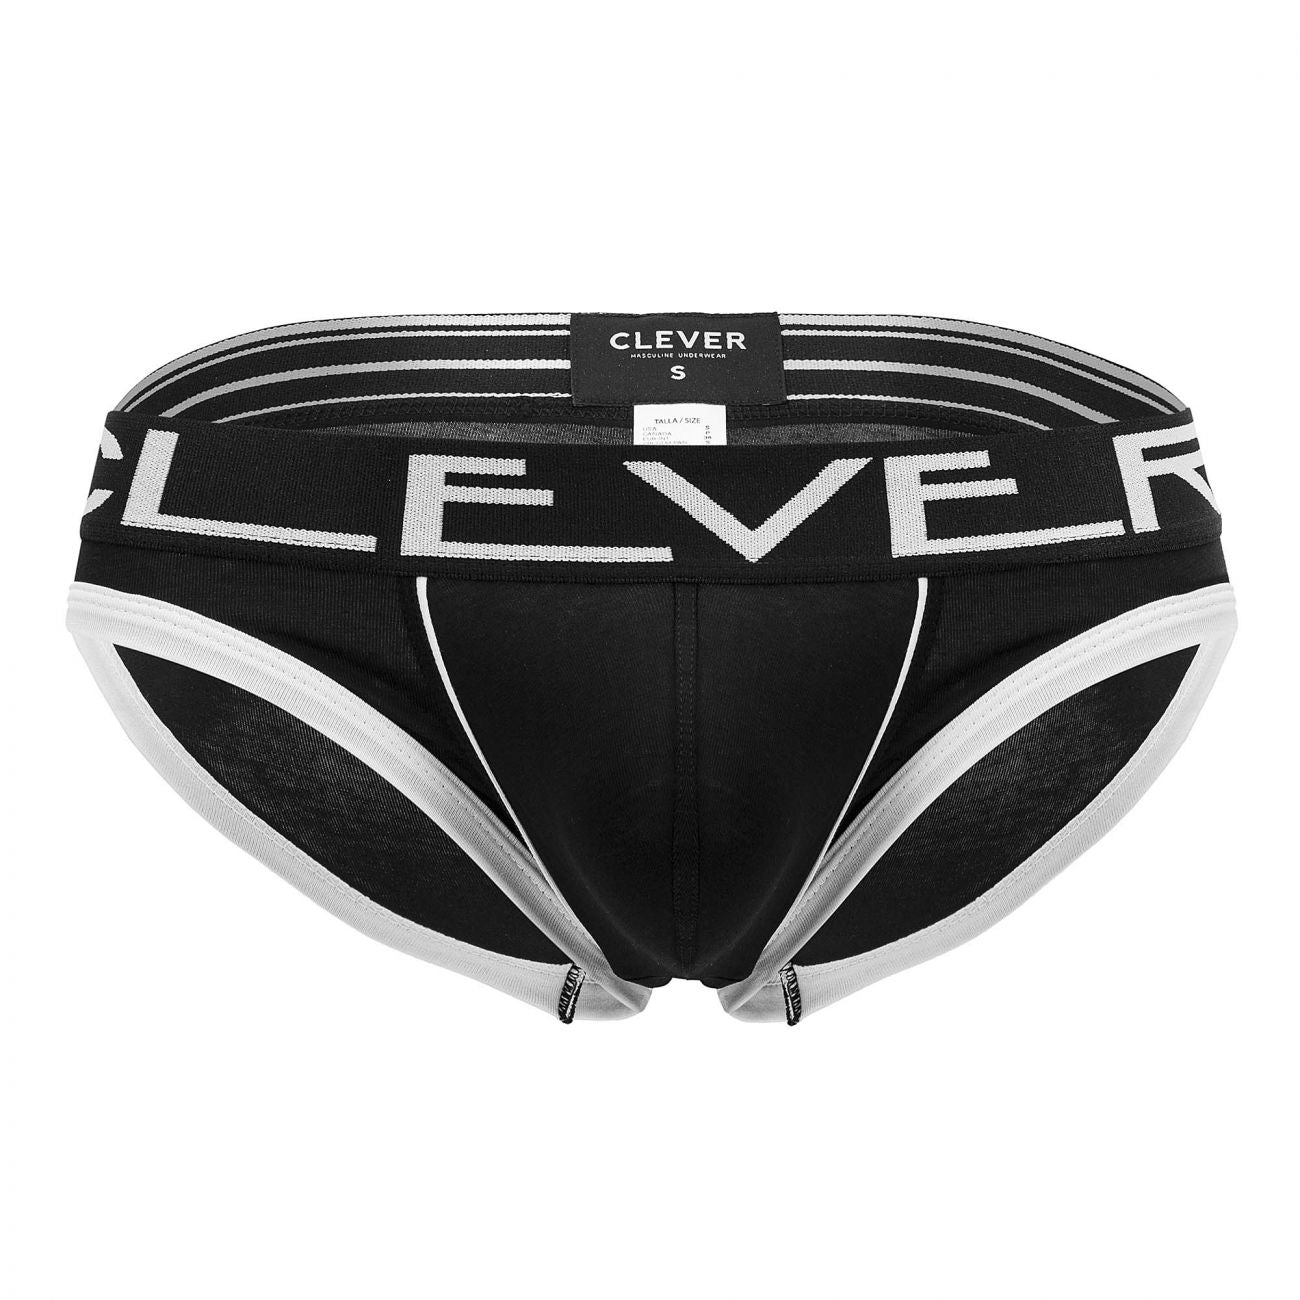 Clever 0624-1 Unchainded Briefs Black